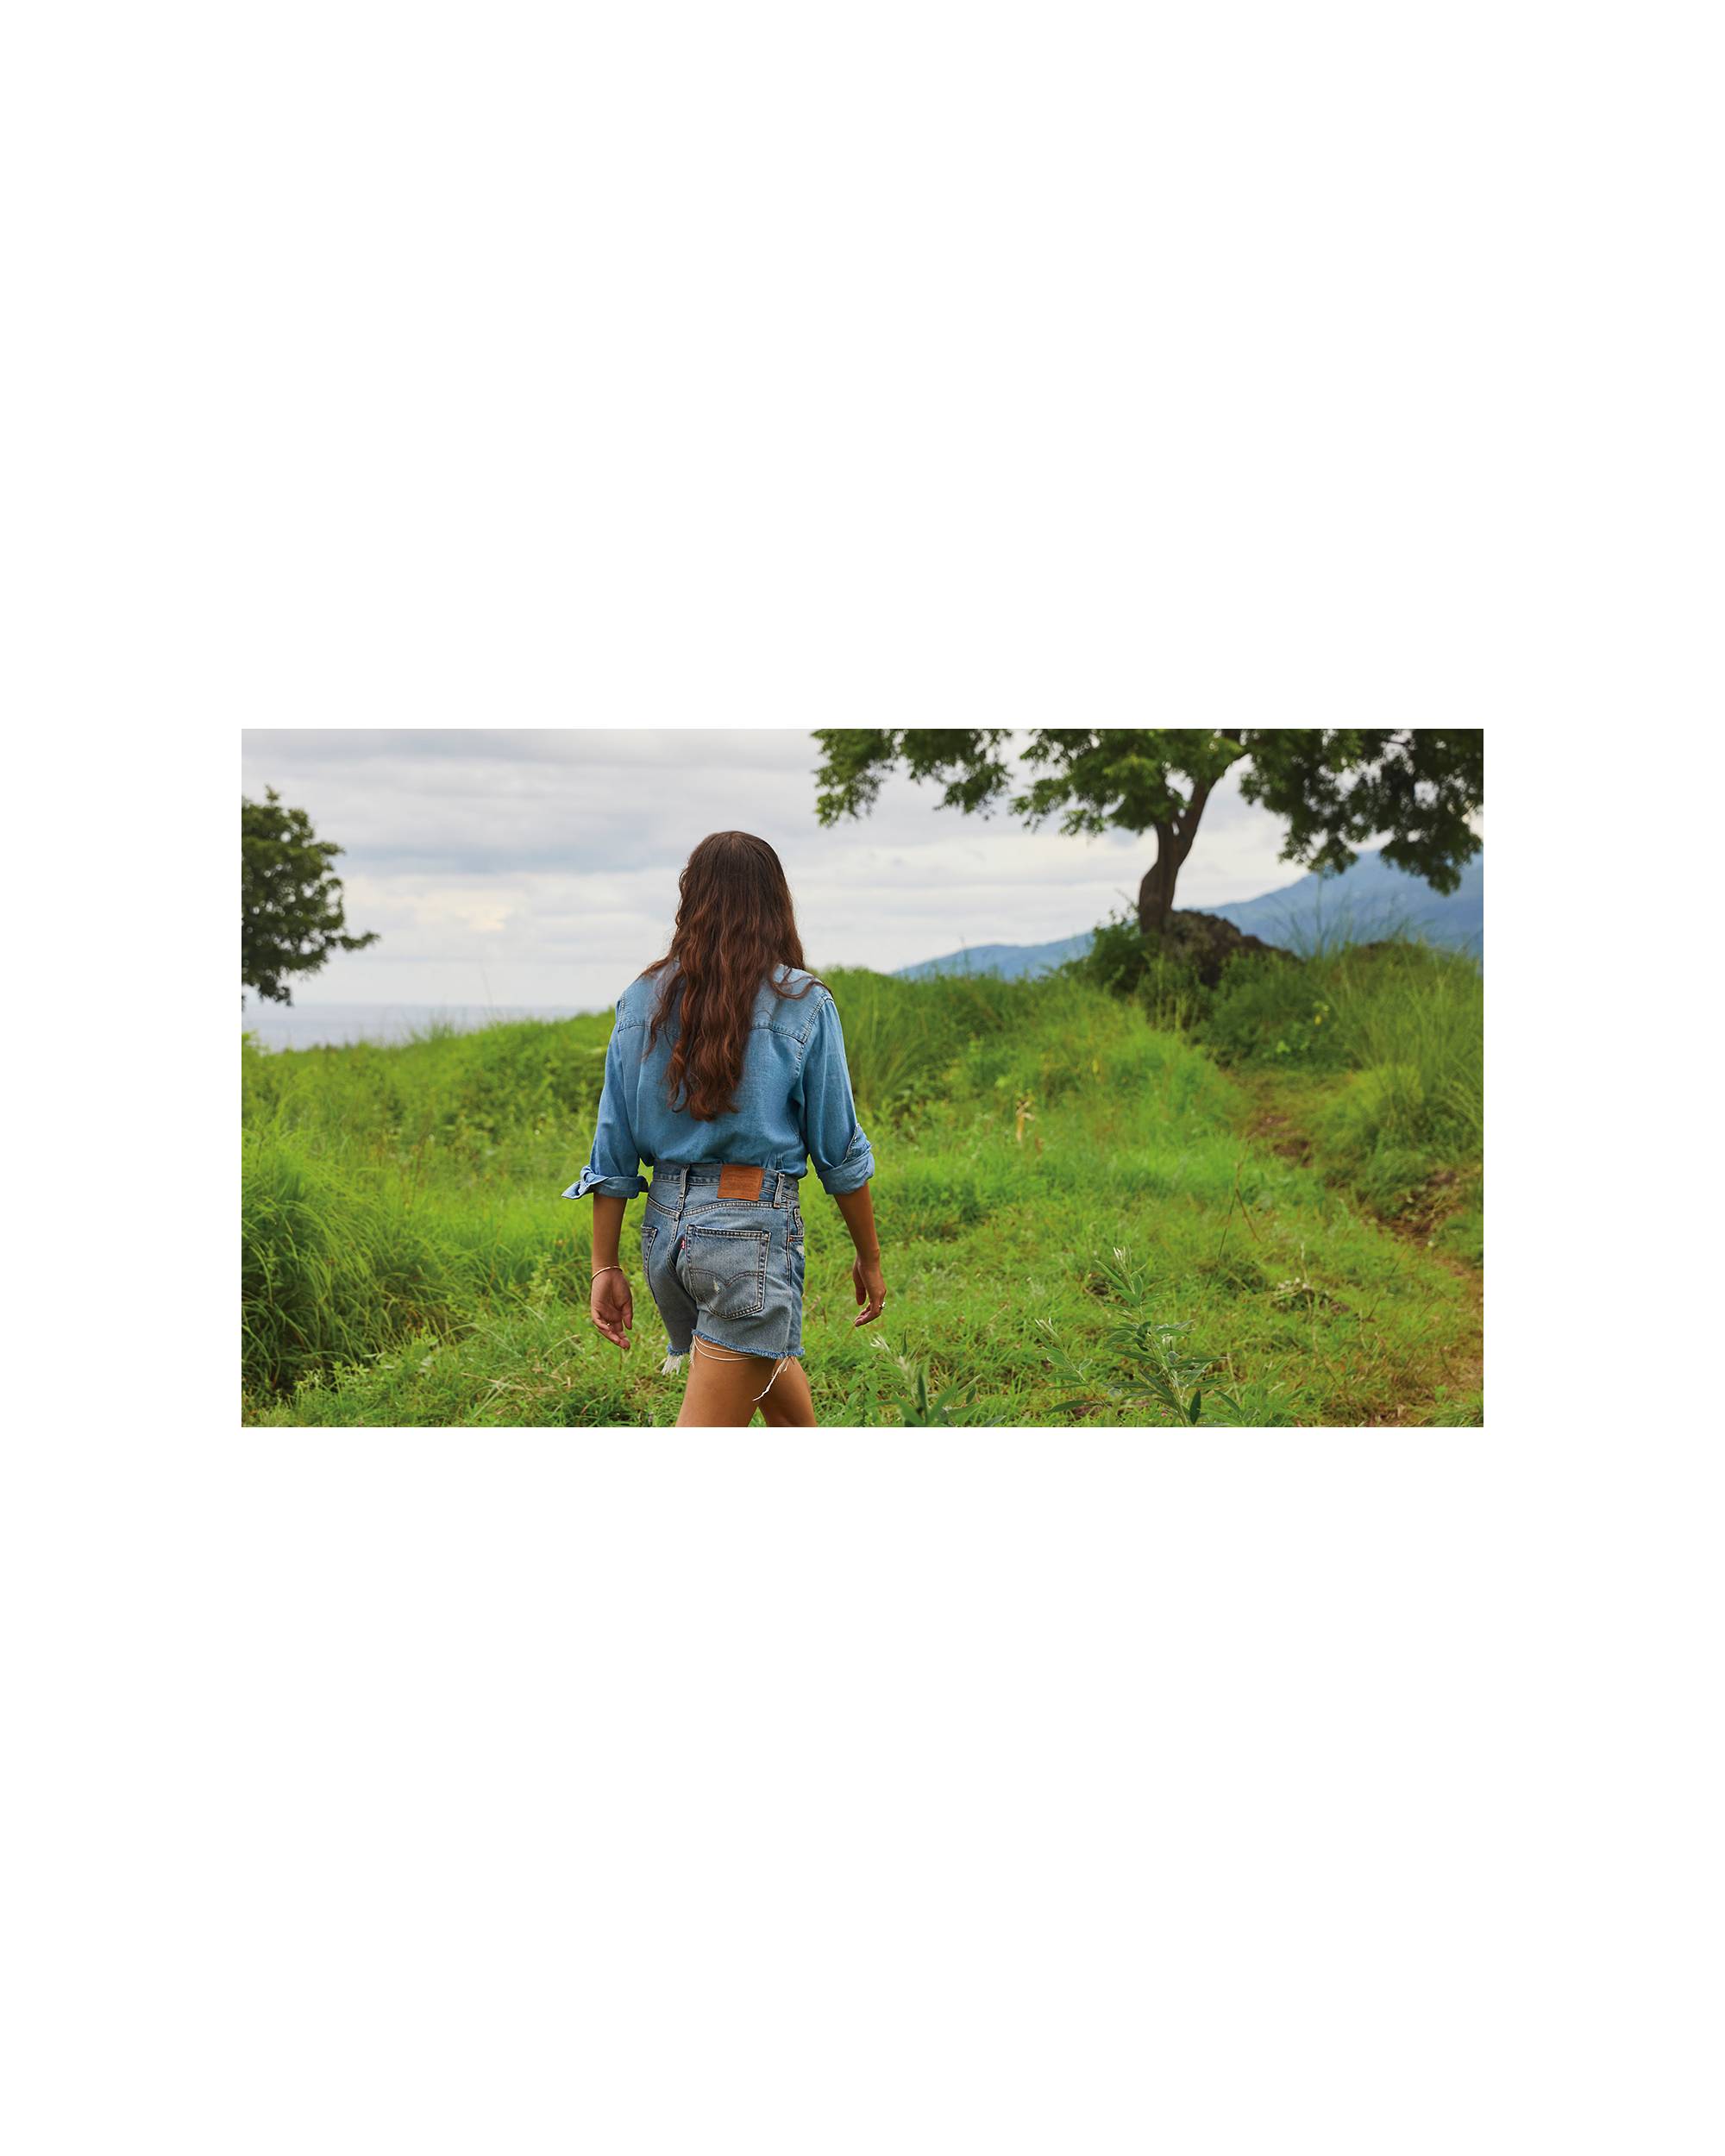 A photo showing Melati from behind walking in a lush green field wearing a Levi's button up and Levi shorts